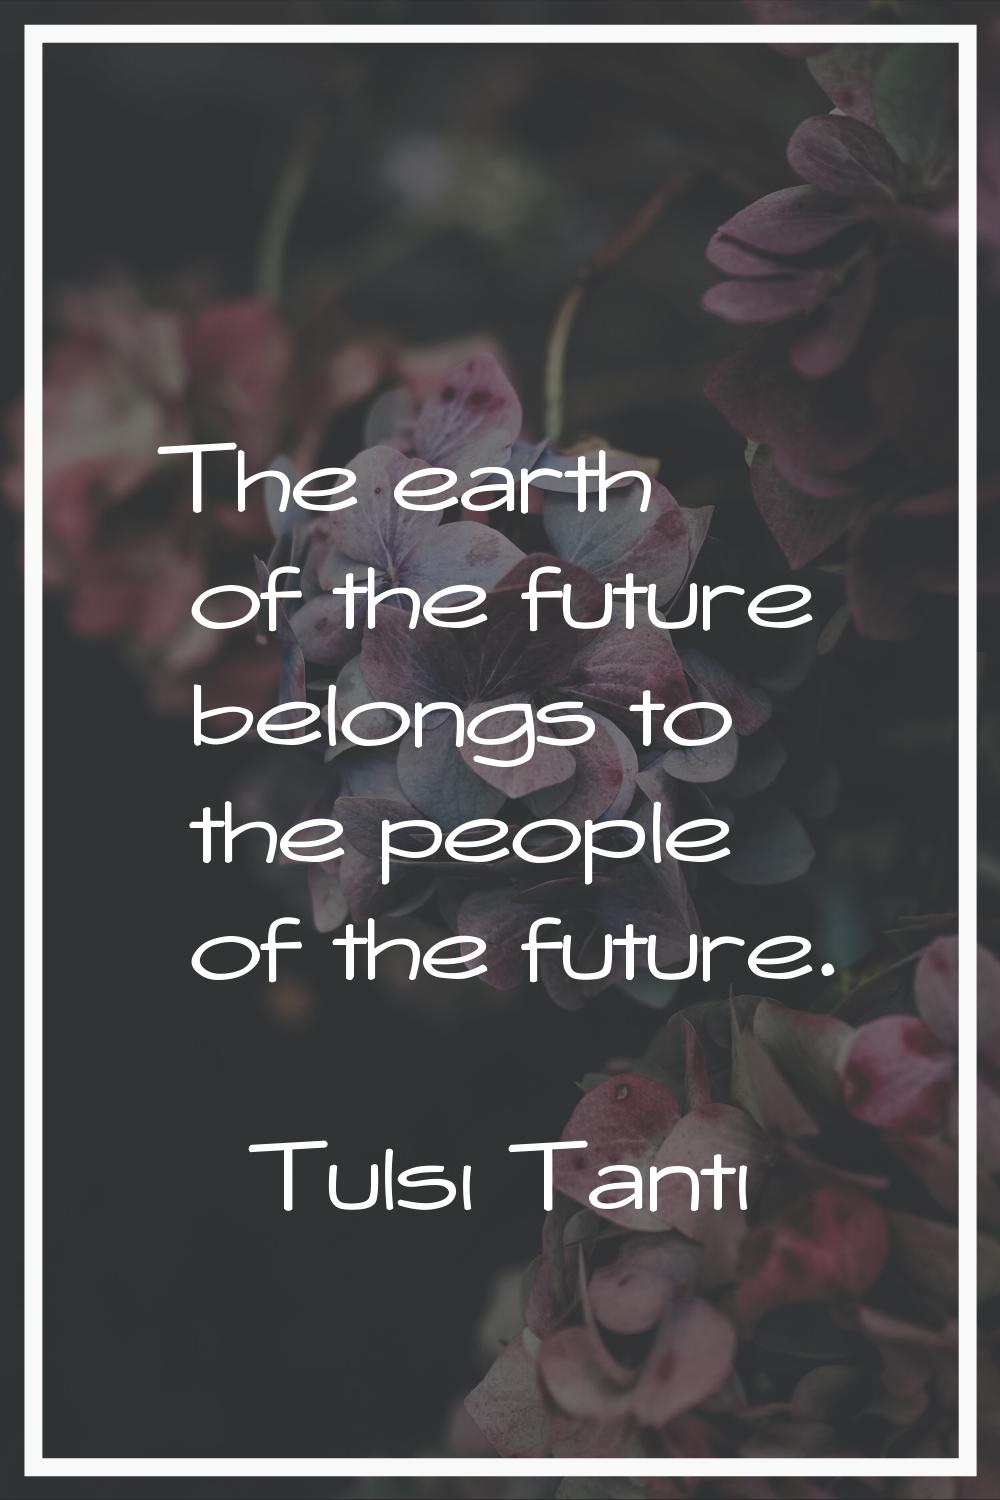 The earth of the future belongs to the people of the future.